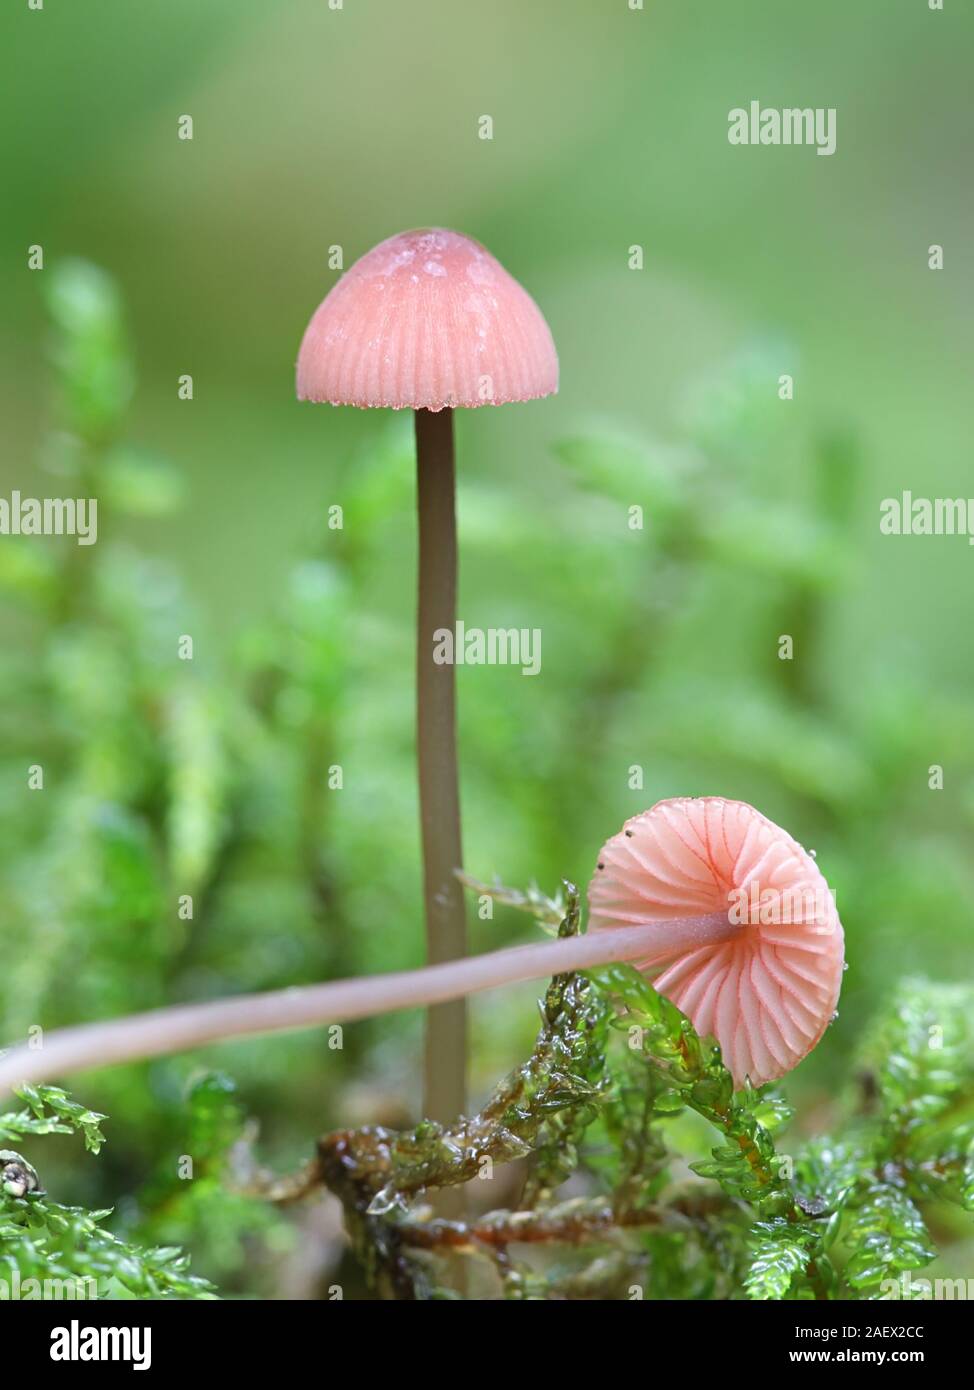 Mycena rosella, known as the pink bonnet, wild mushroom from Finland Stock Photo